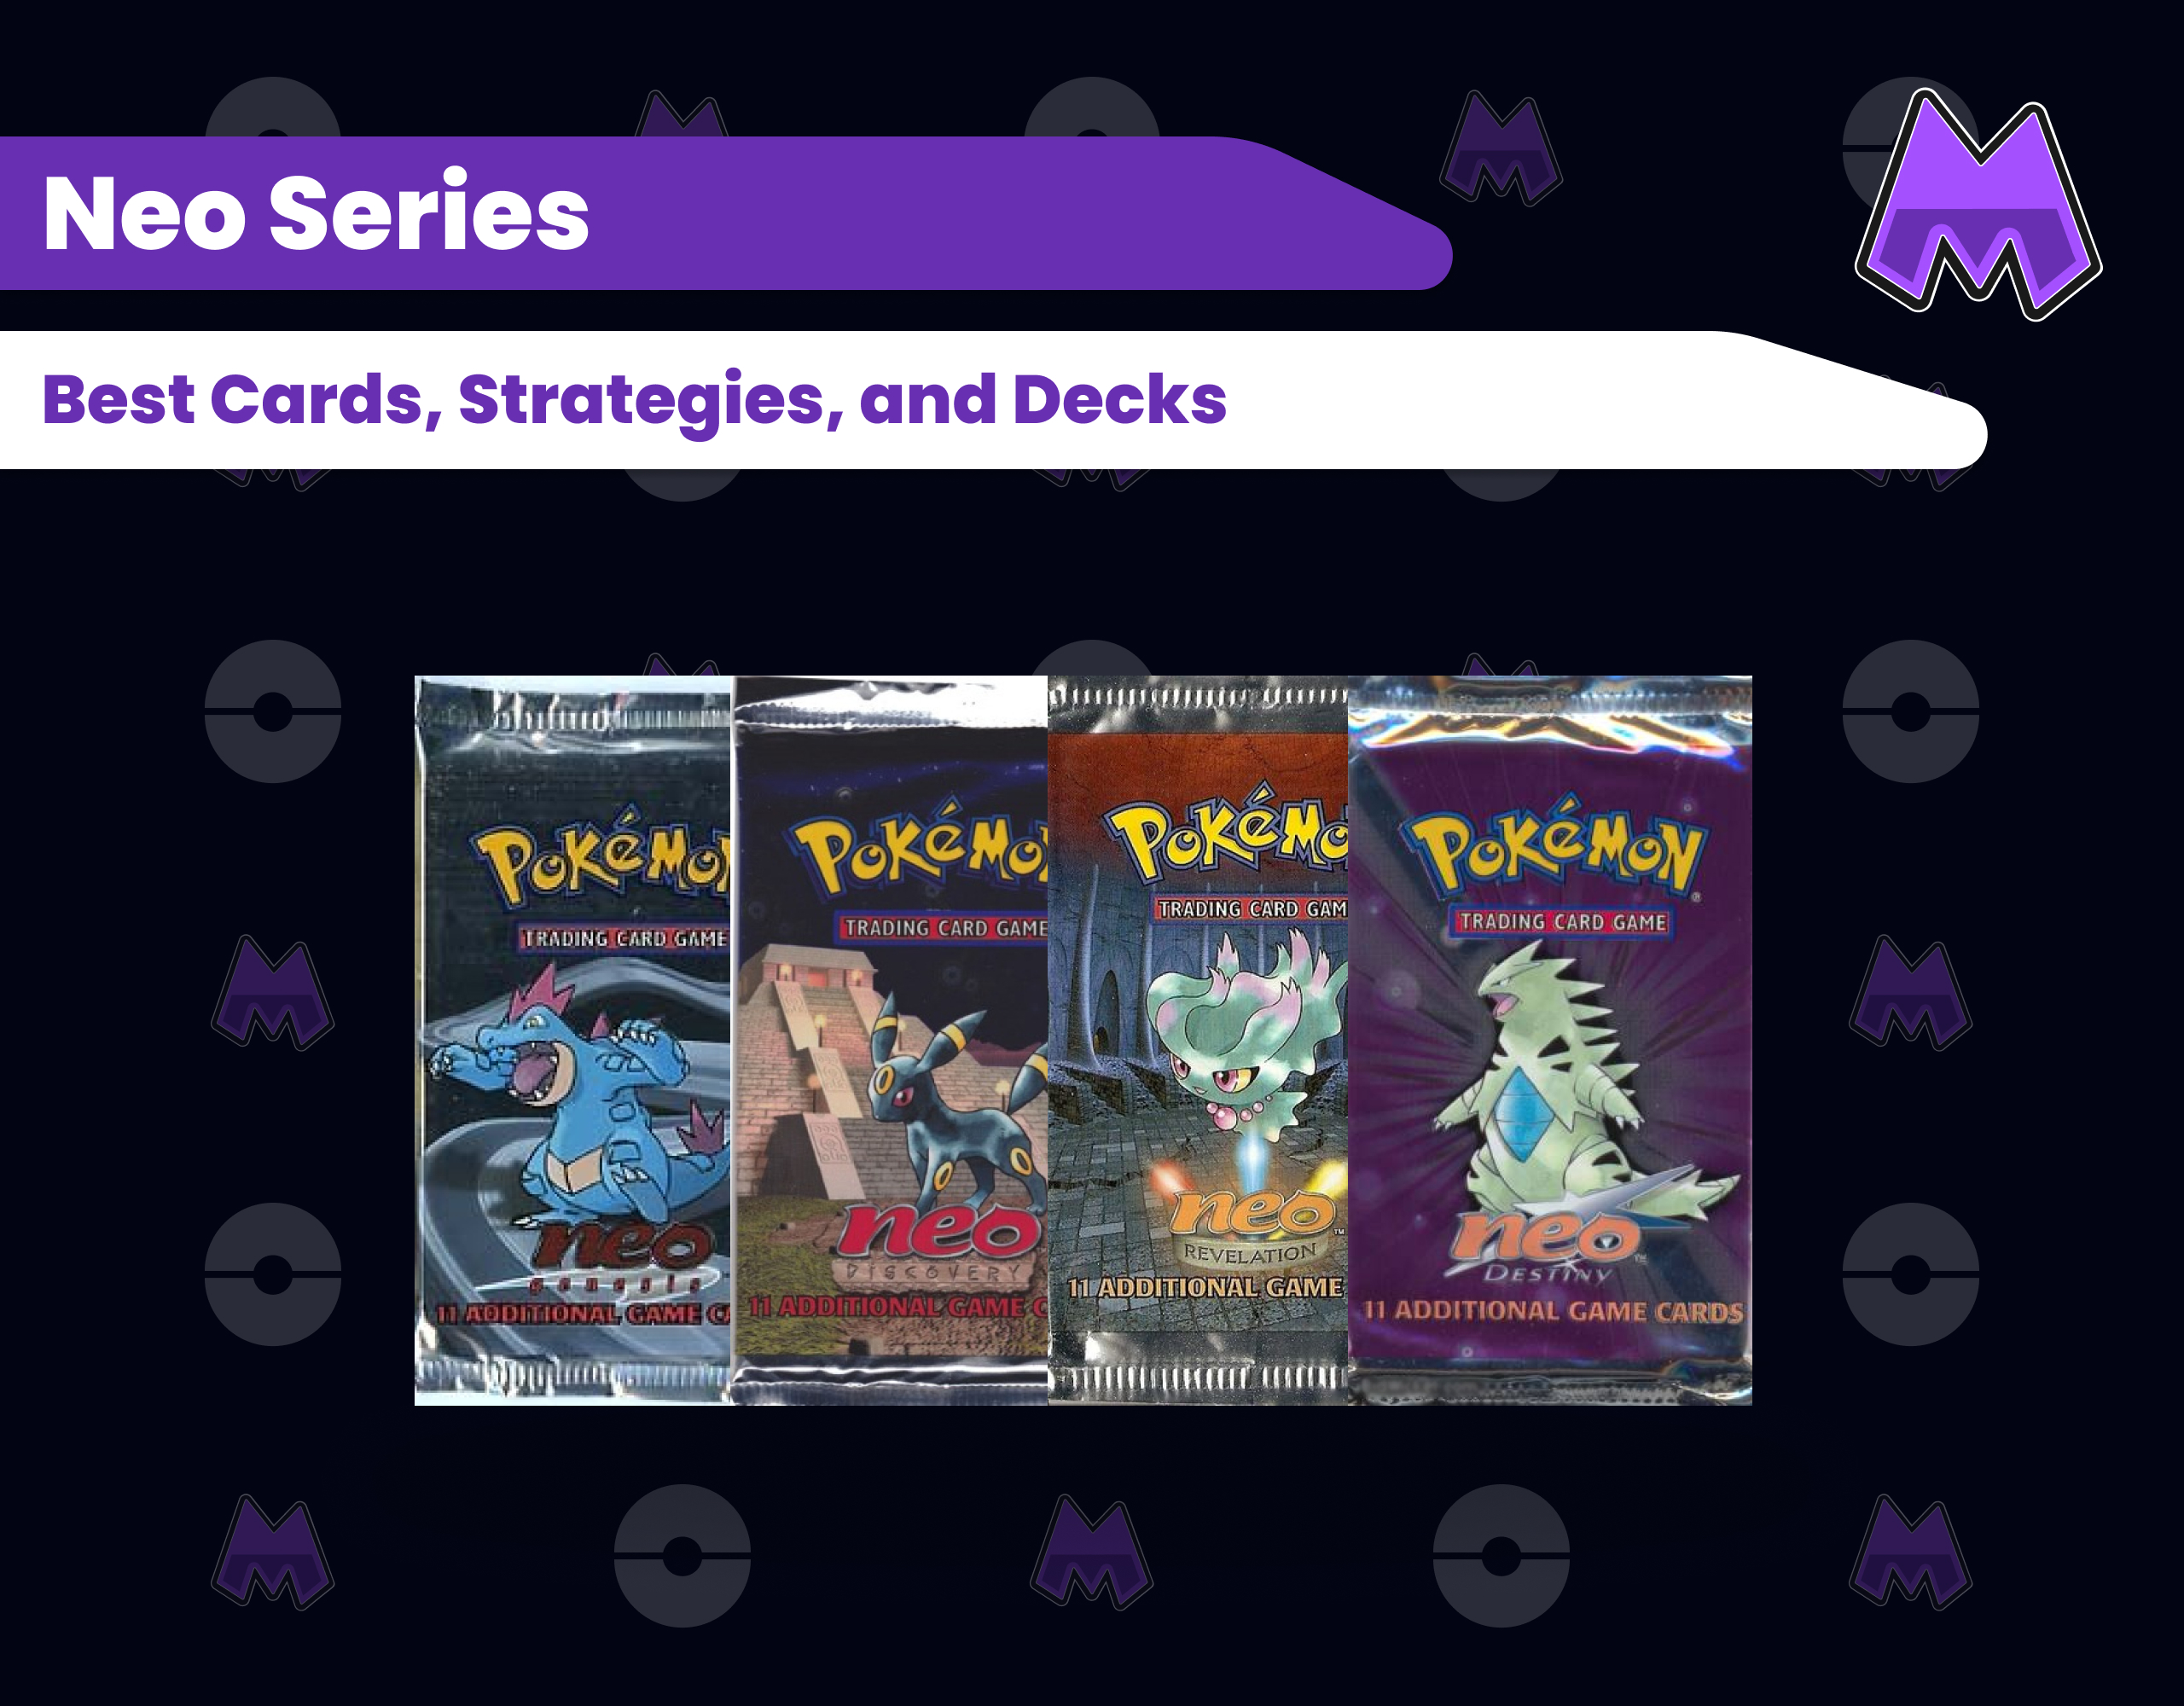 Best Neo Series Pokemon Cards - all 4 neo series expansion packs - neo genesis, neo discovery, neo revelation, and neo destiny